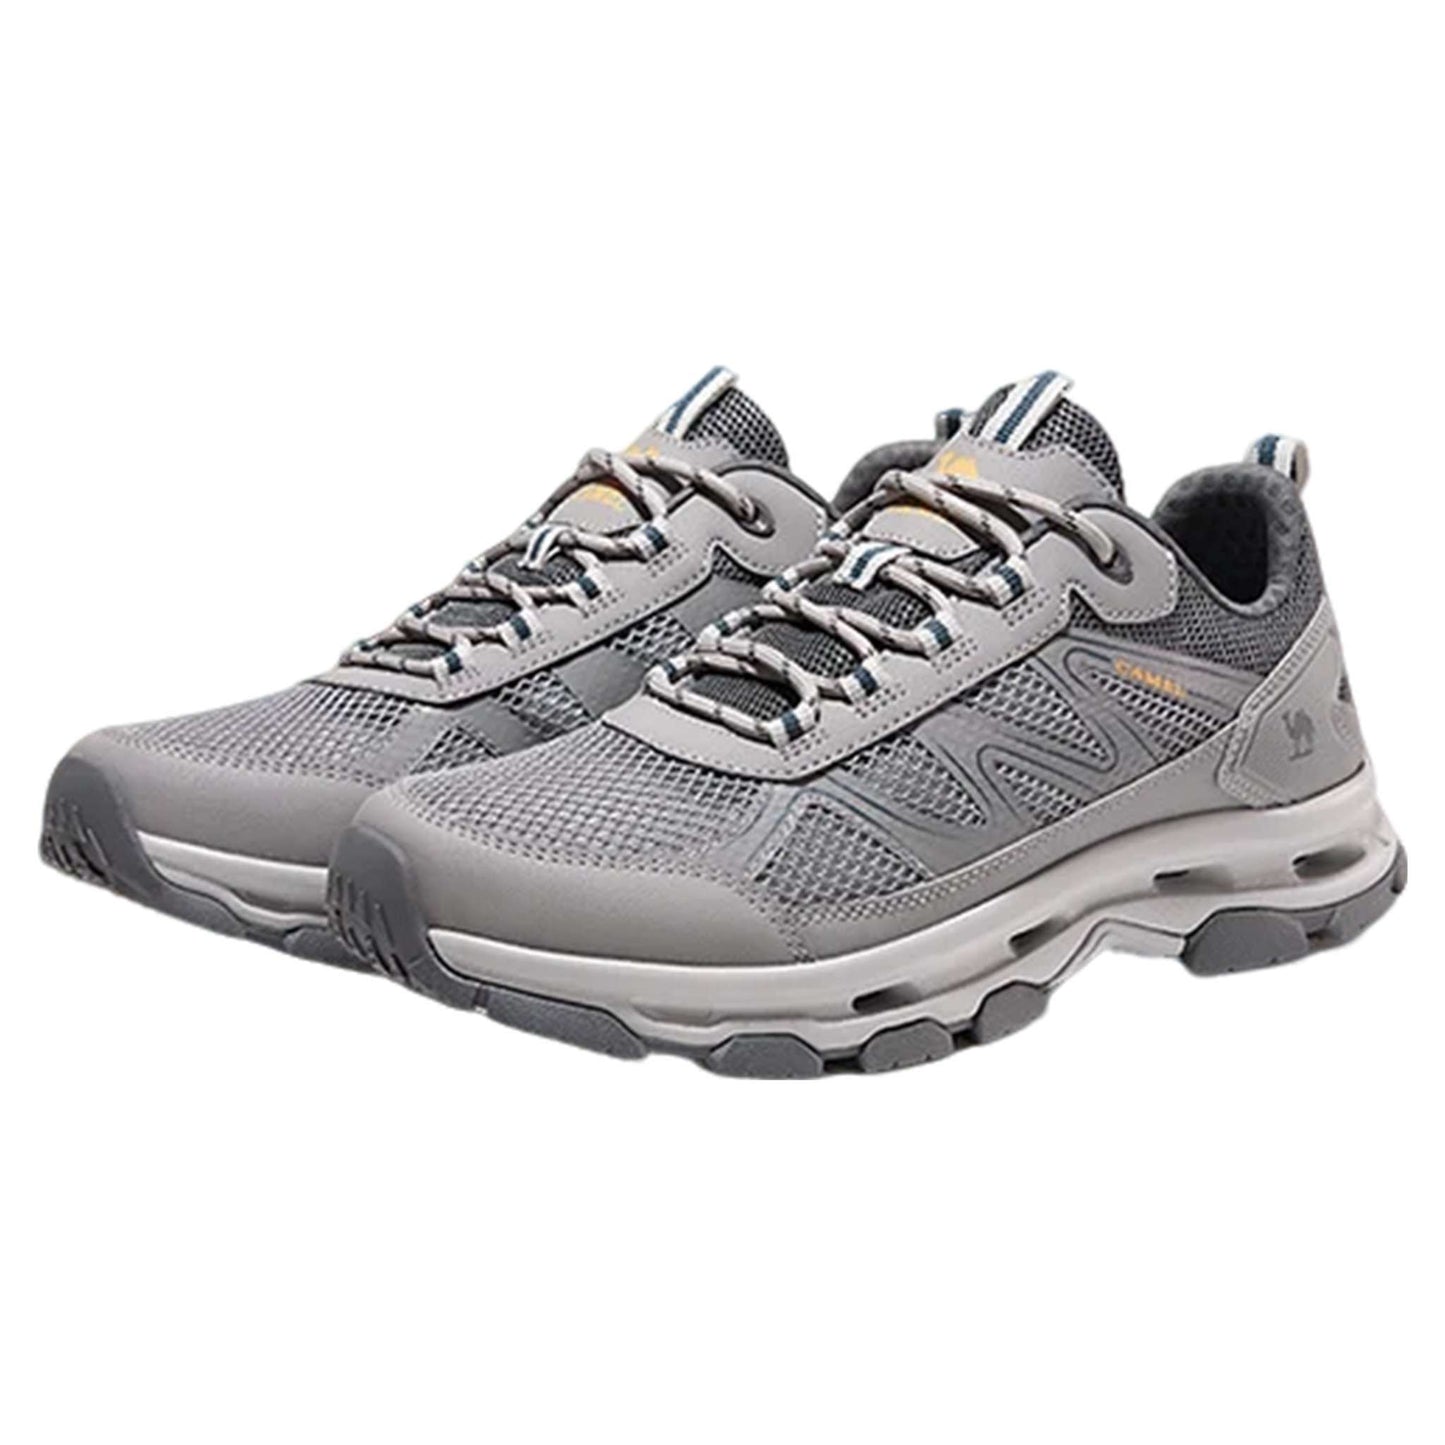 Men's Non-Slip Trail Running Shoes - Breathable Quick-Dry Outdoor Performance Footwear